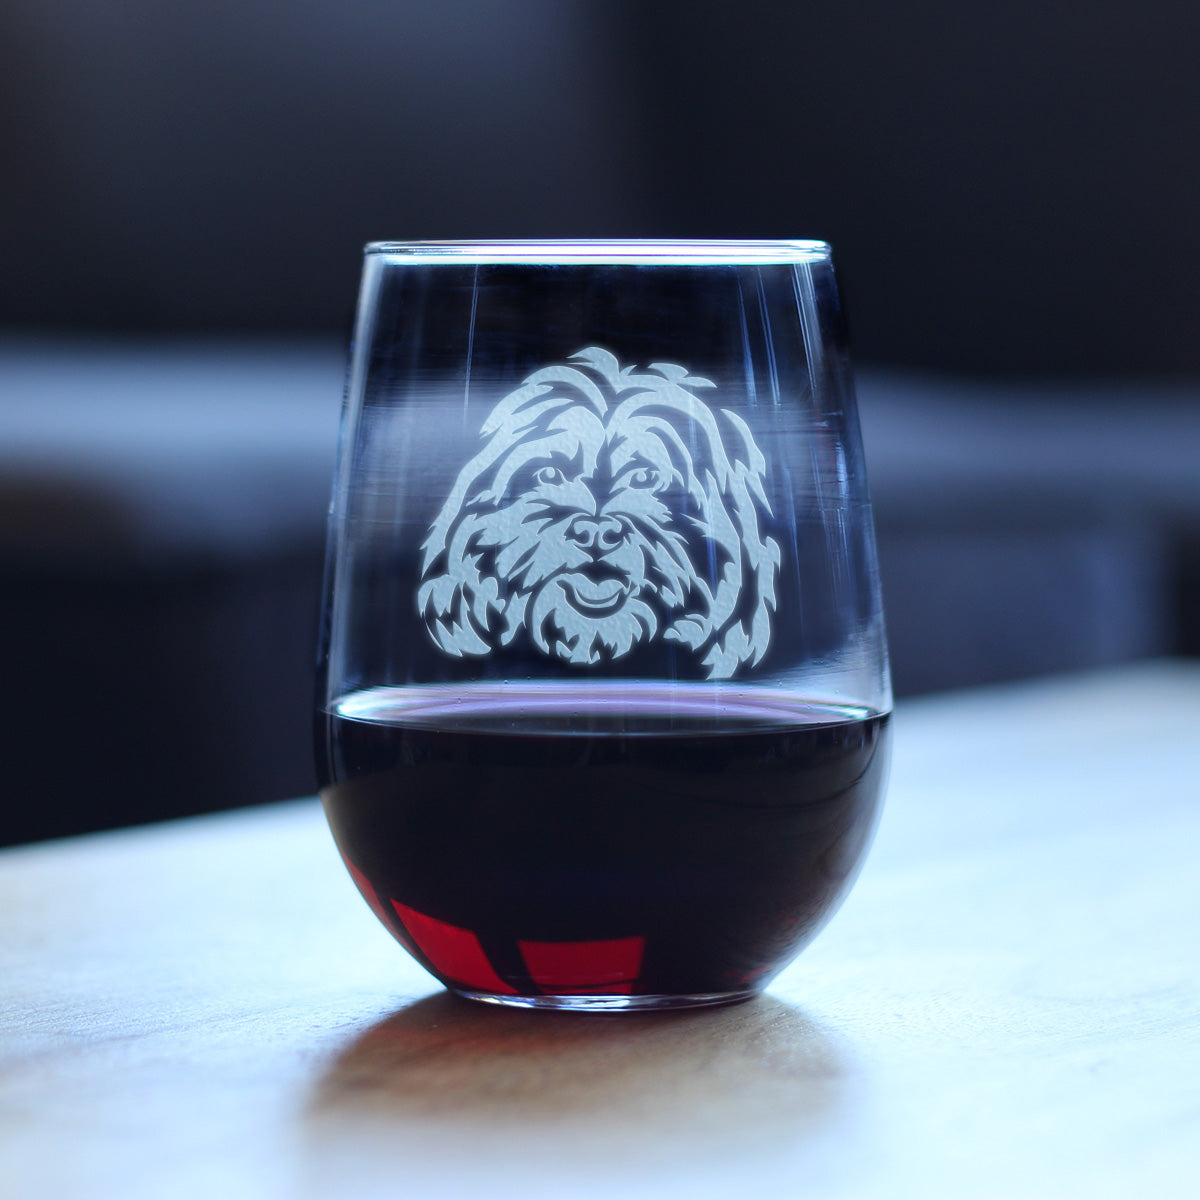 Shih Tzu Face Stemless Wine Glass - Cute Dog Themed Decor and Gifts for Moms &amp; Dads of Shih Tzus - Large 17 Oz